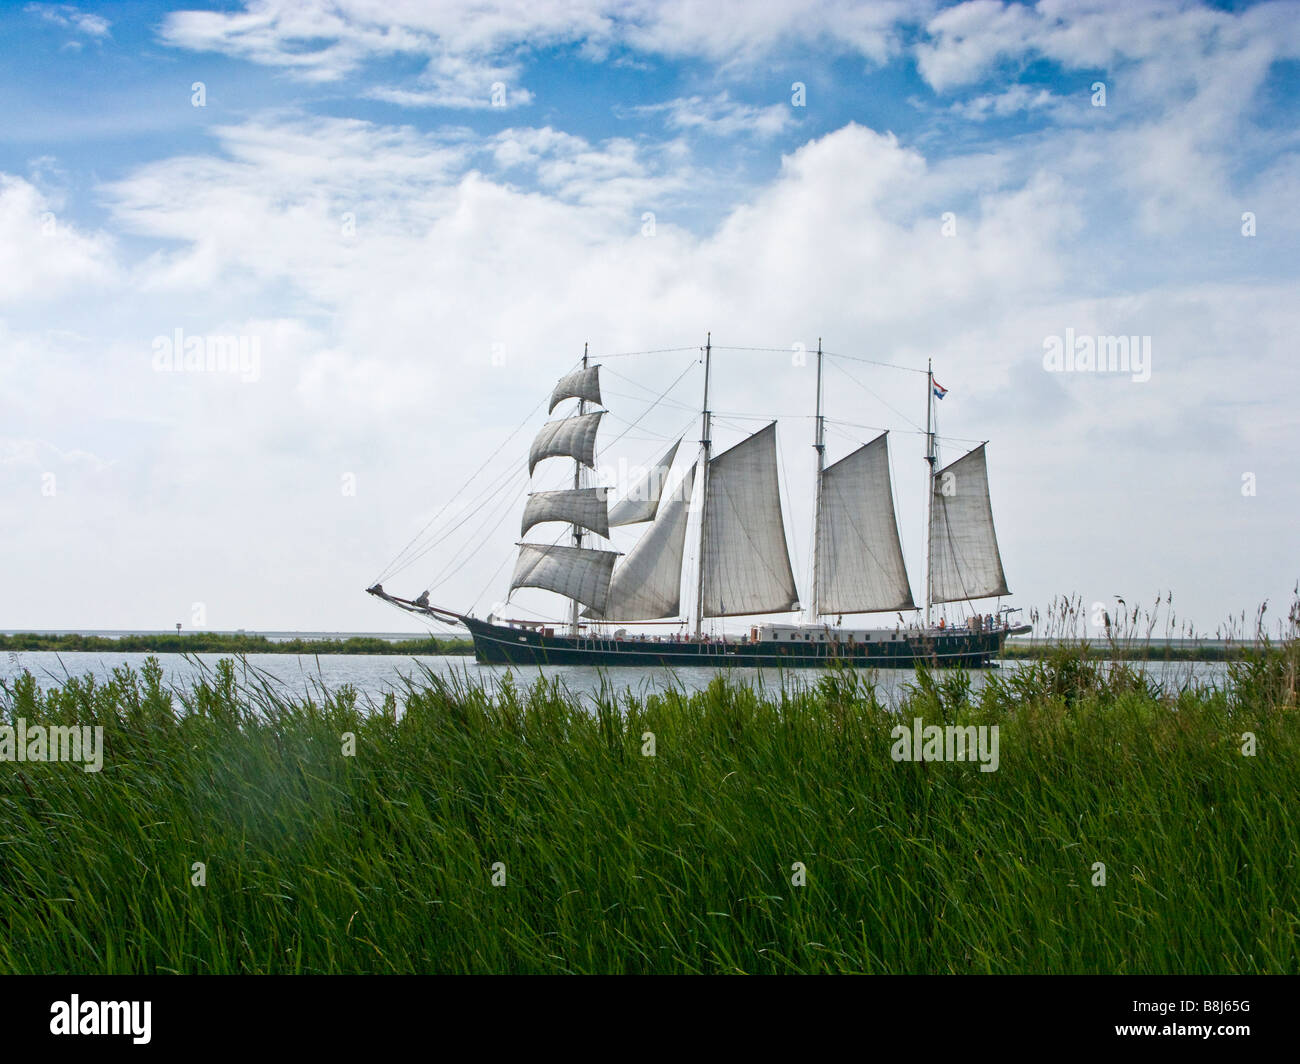 Sailship with four masts and sails up, Isselmeer, Enkhuizen the Netherlands 2008 For editorial use only. Stock Photo